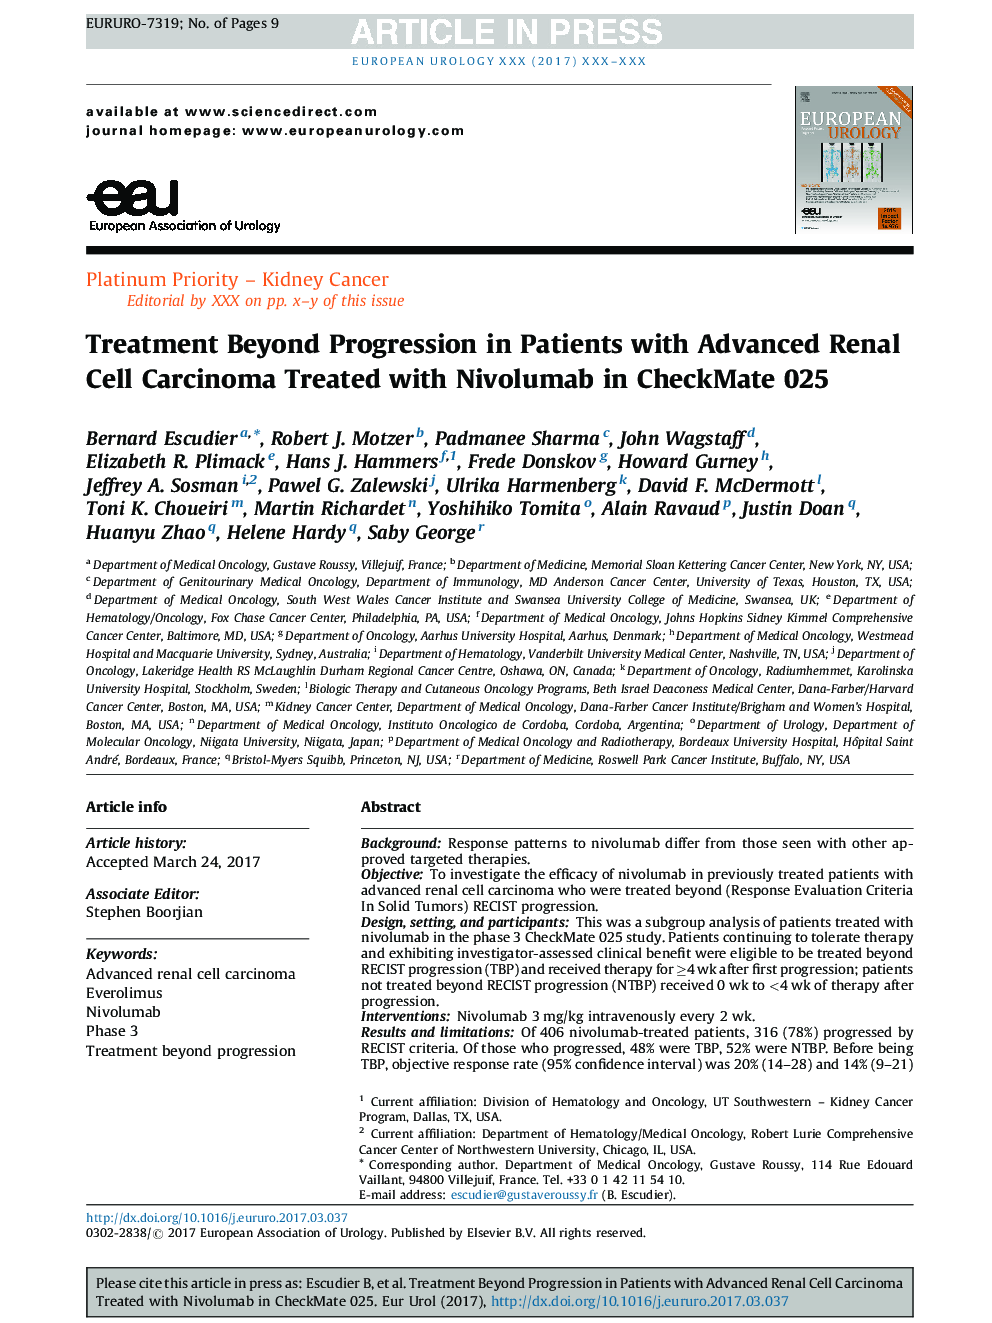 Treatment Beyond Progression in Patients with Advanced Renal Cell Carcinoma Treated with Nivolumab in CheckMate 025